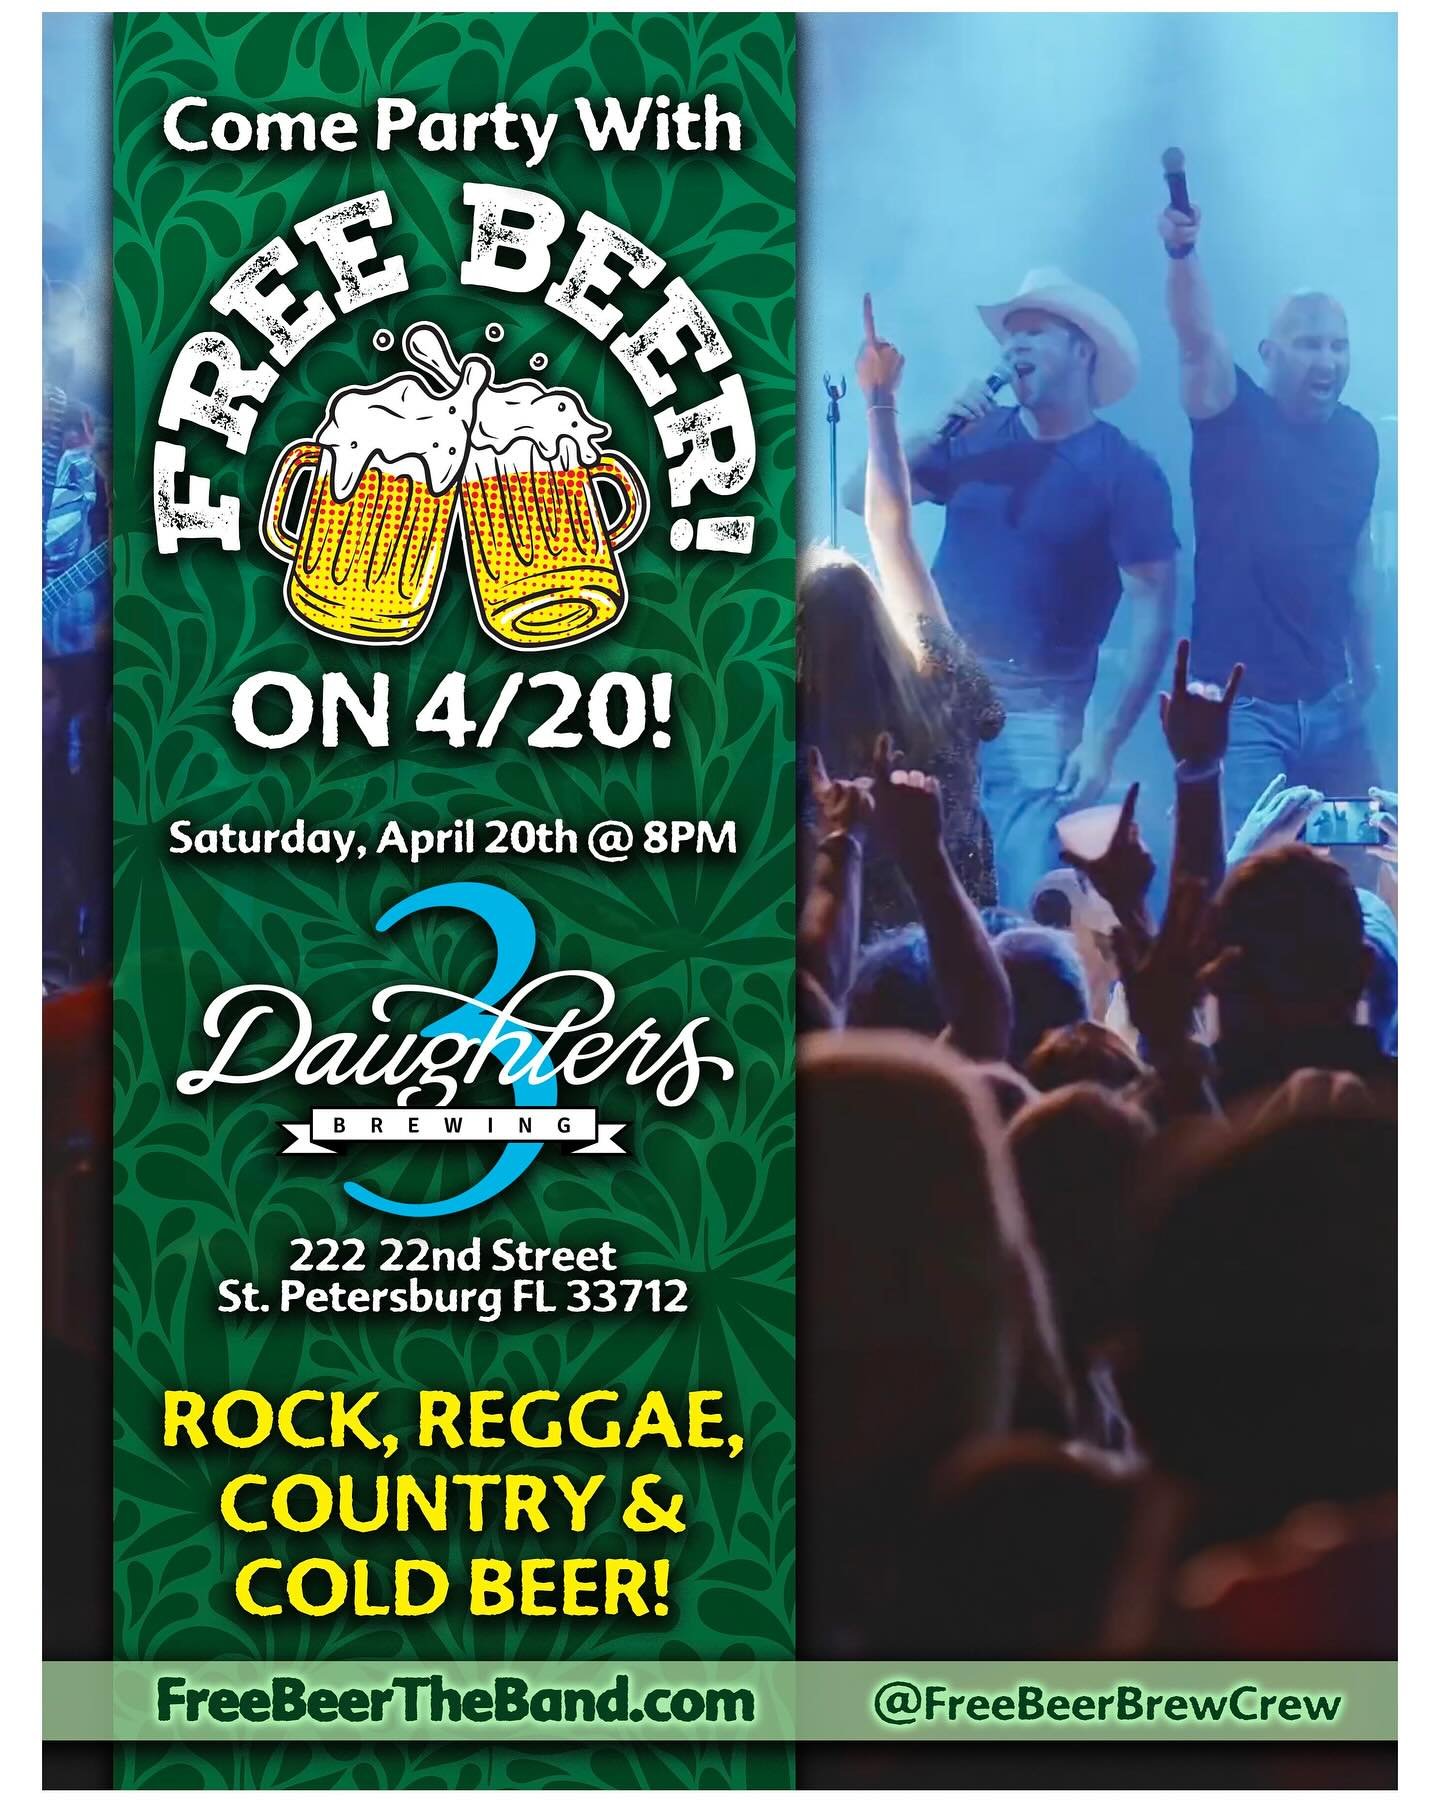 I don&rsquo;t know about you, but we&rsquo;re ready to party!🍻

Great tunes, cold beers, and good company are what we&rsquo;re all about. Come see us live on 4/20 at @3daughtersbrewing show starts at 8pm.

Tell your friends and family, let&rsquo;s m